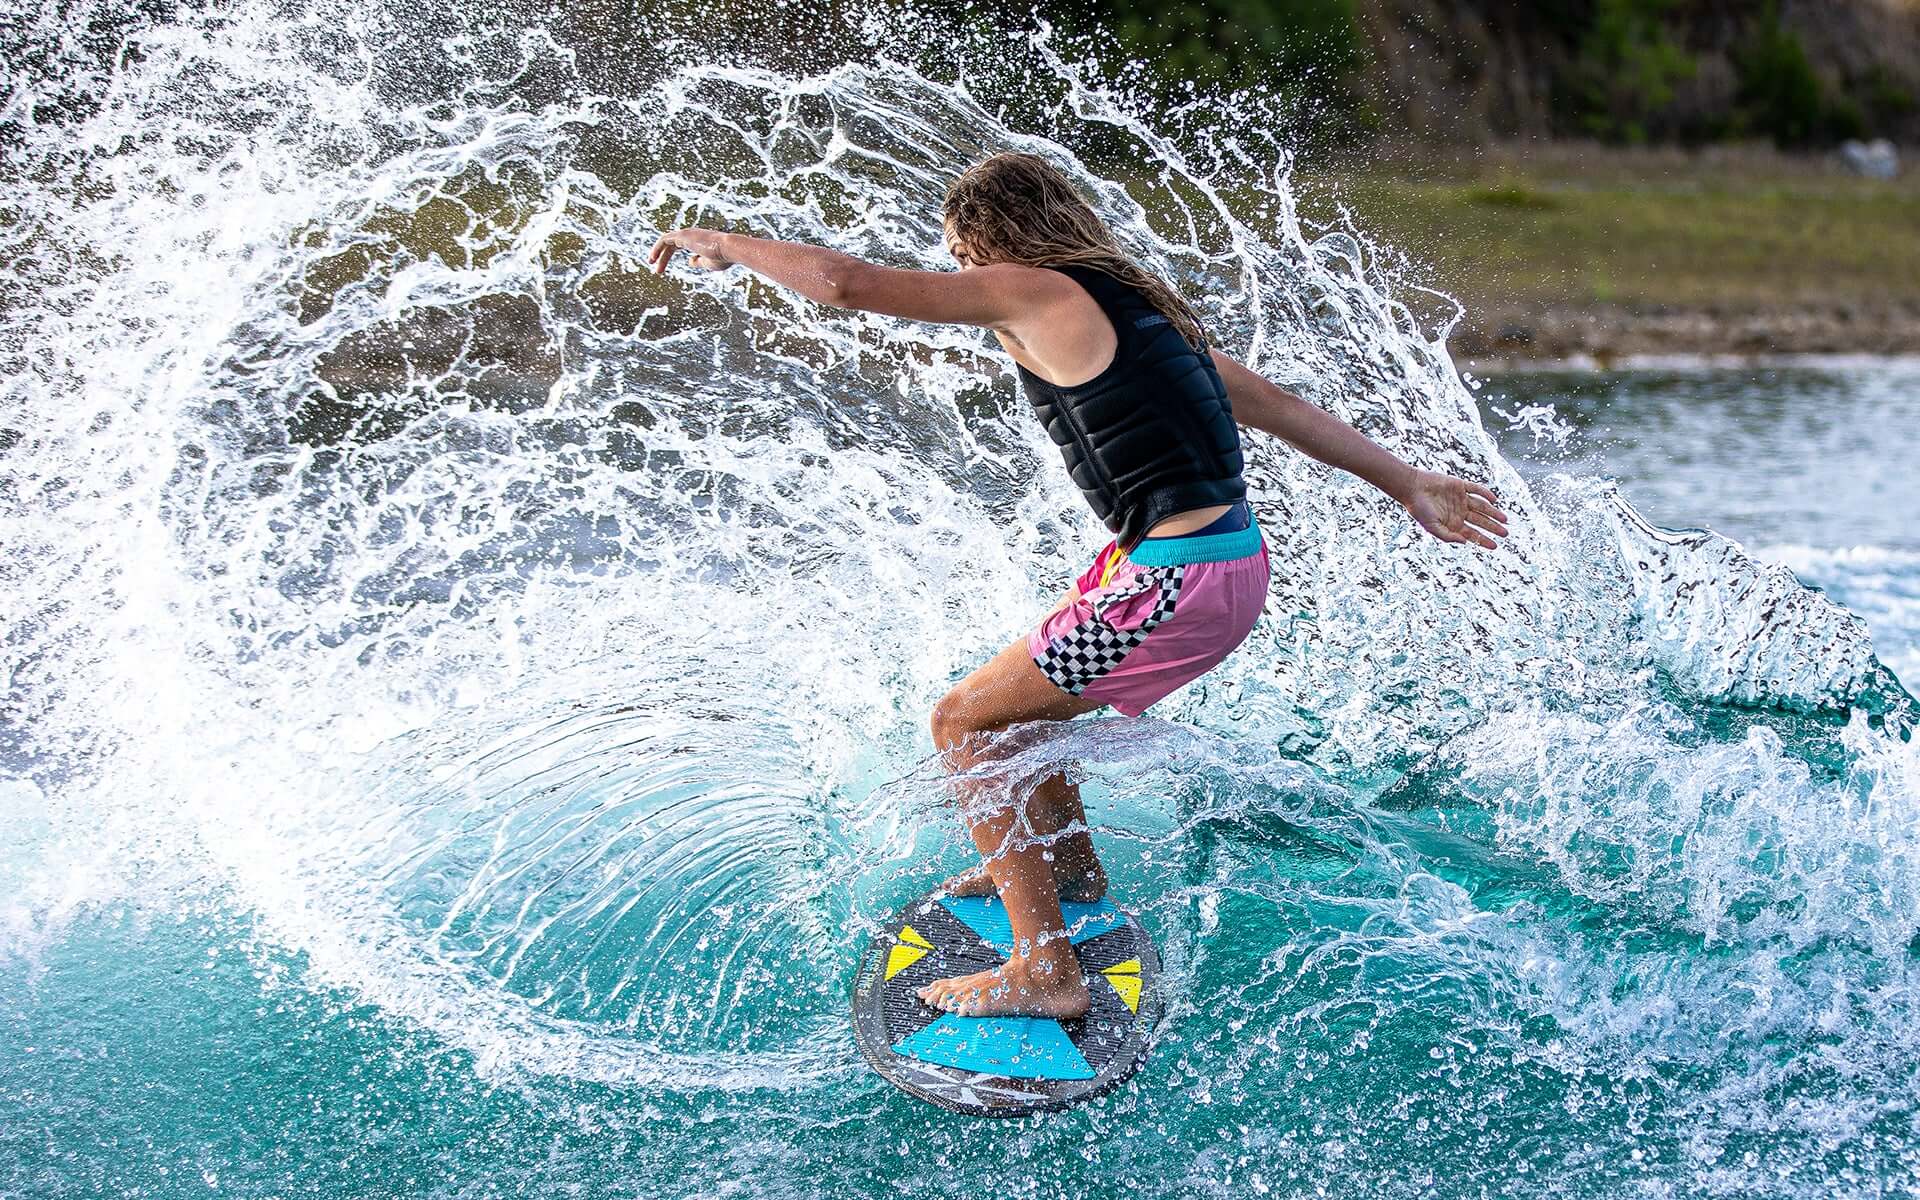 Phase 5 Jett Shreds Key is seen gracefully riding a wave on a surfboard equipped with a Single Fin Setup. The surfer's skillful maneuvers are made possible by the reliable and durable Phase 5 2024 Key Jett Shreds Wakesurf Board.